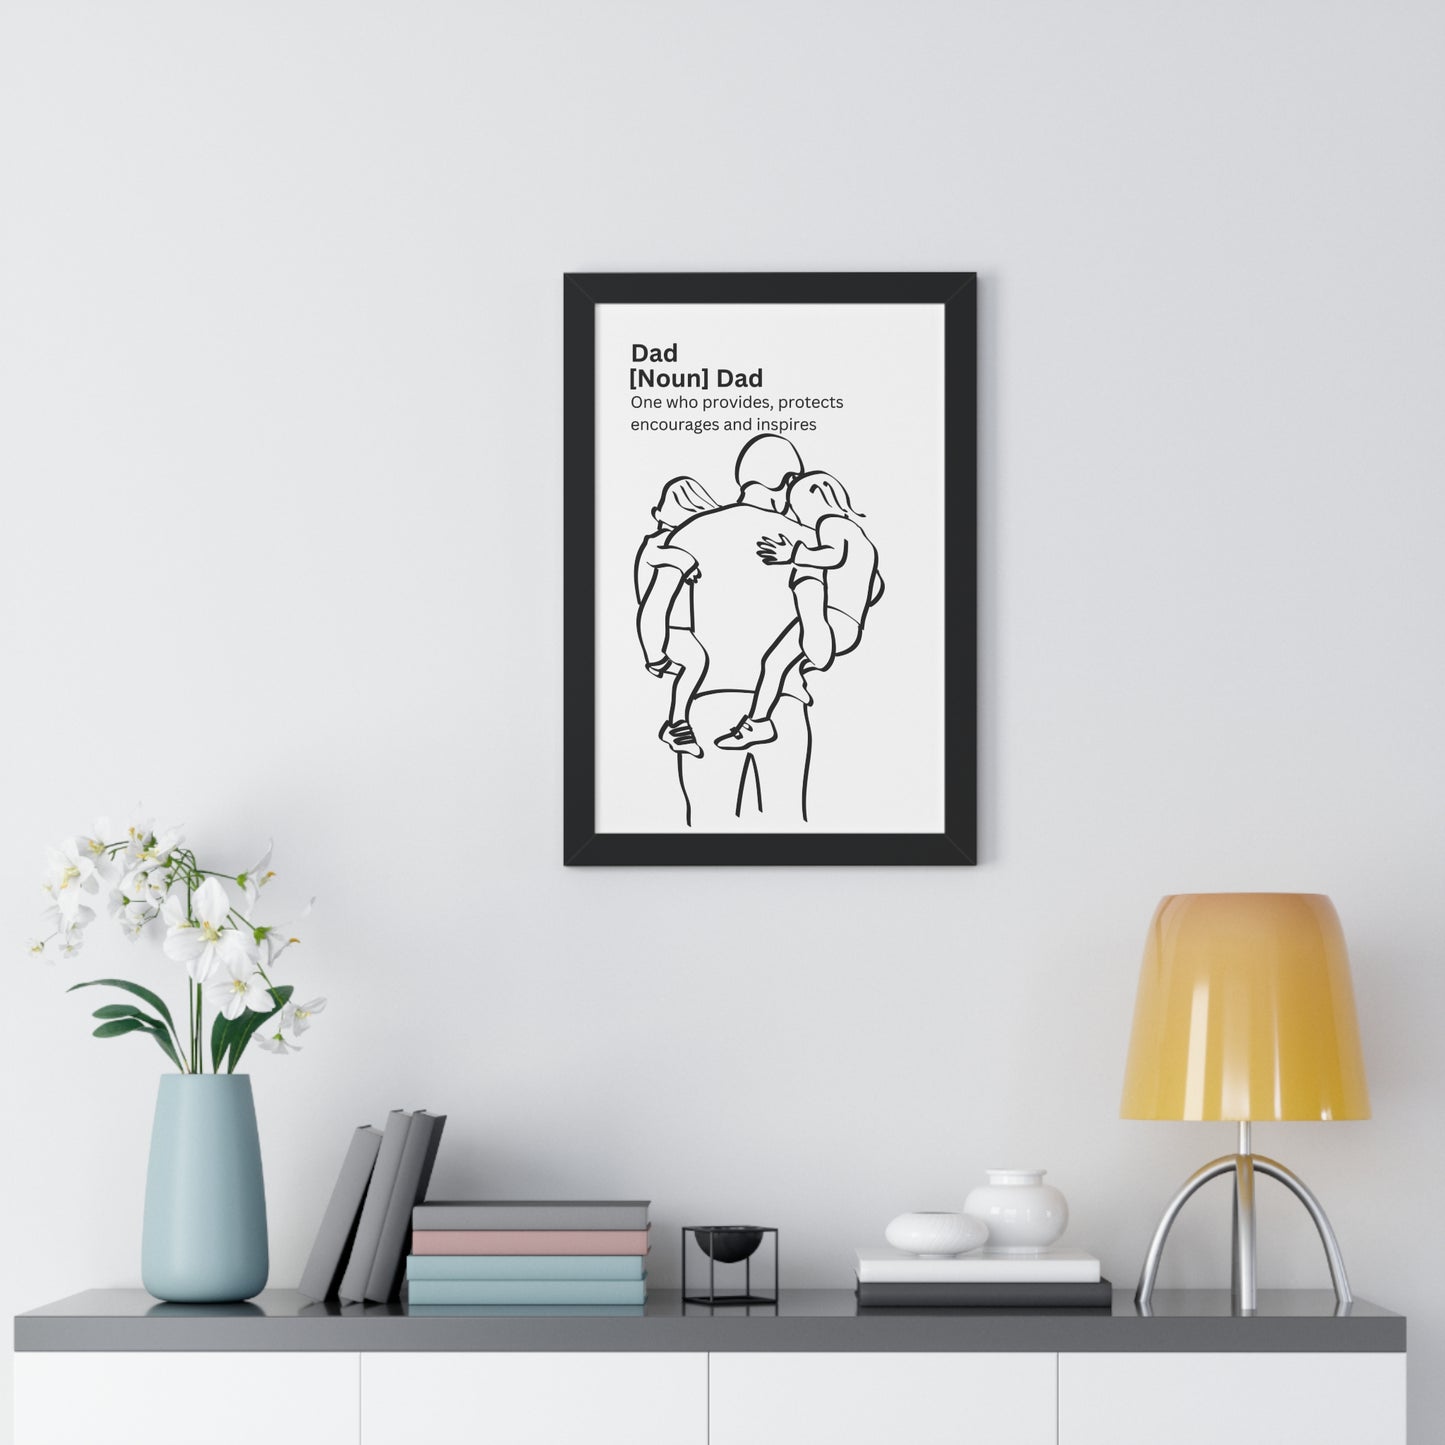 Cherish Every Moment: Dad Framed Poster